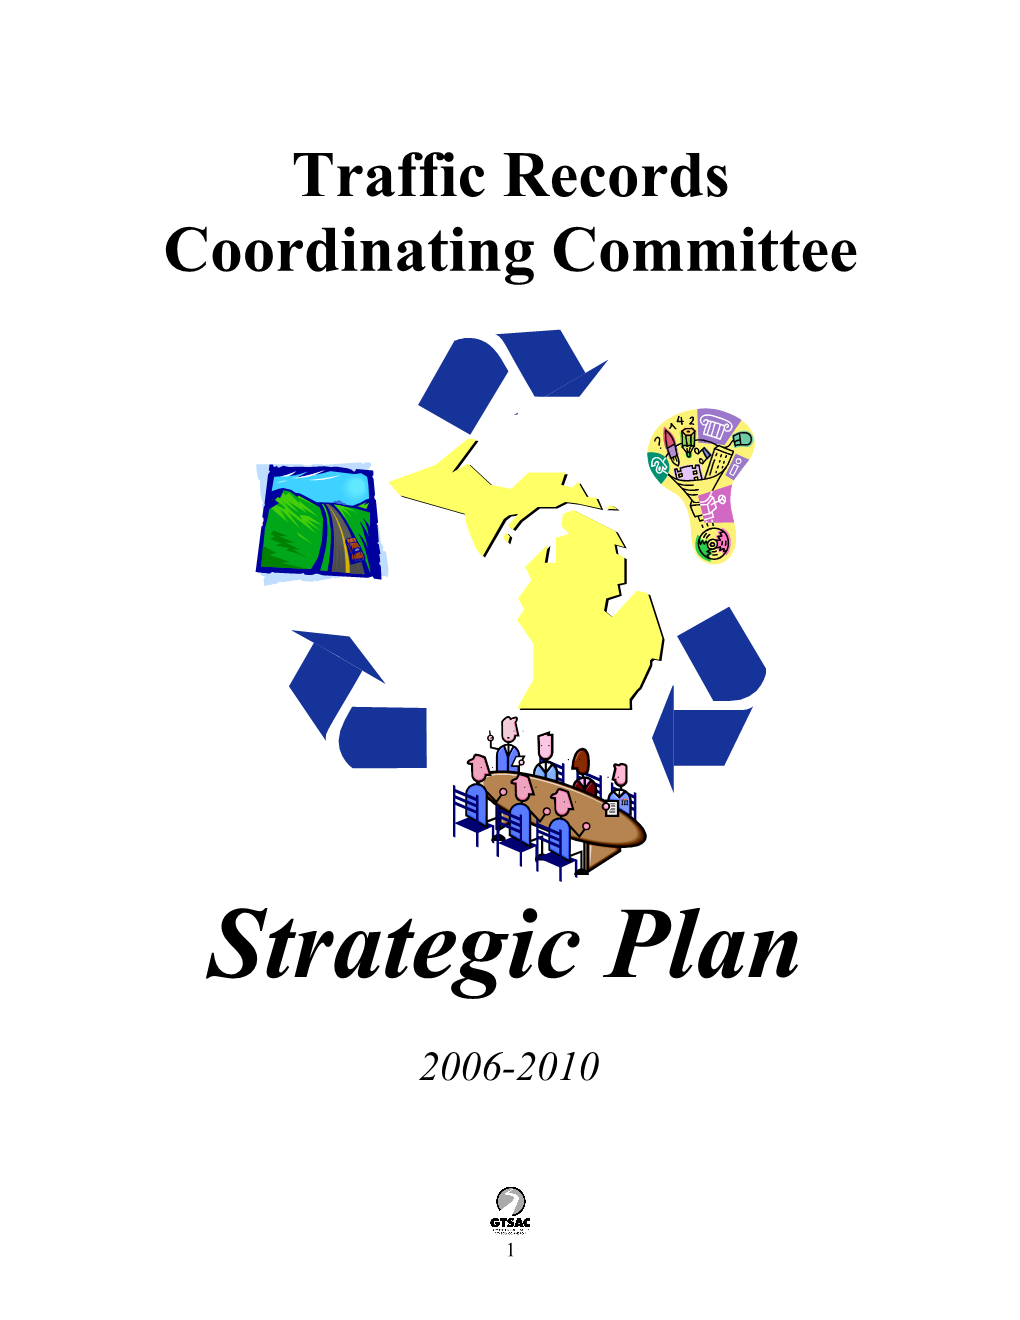 Traffic Records Coordinating Committee